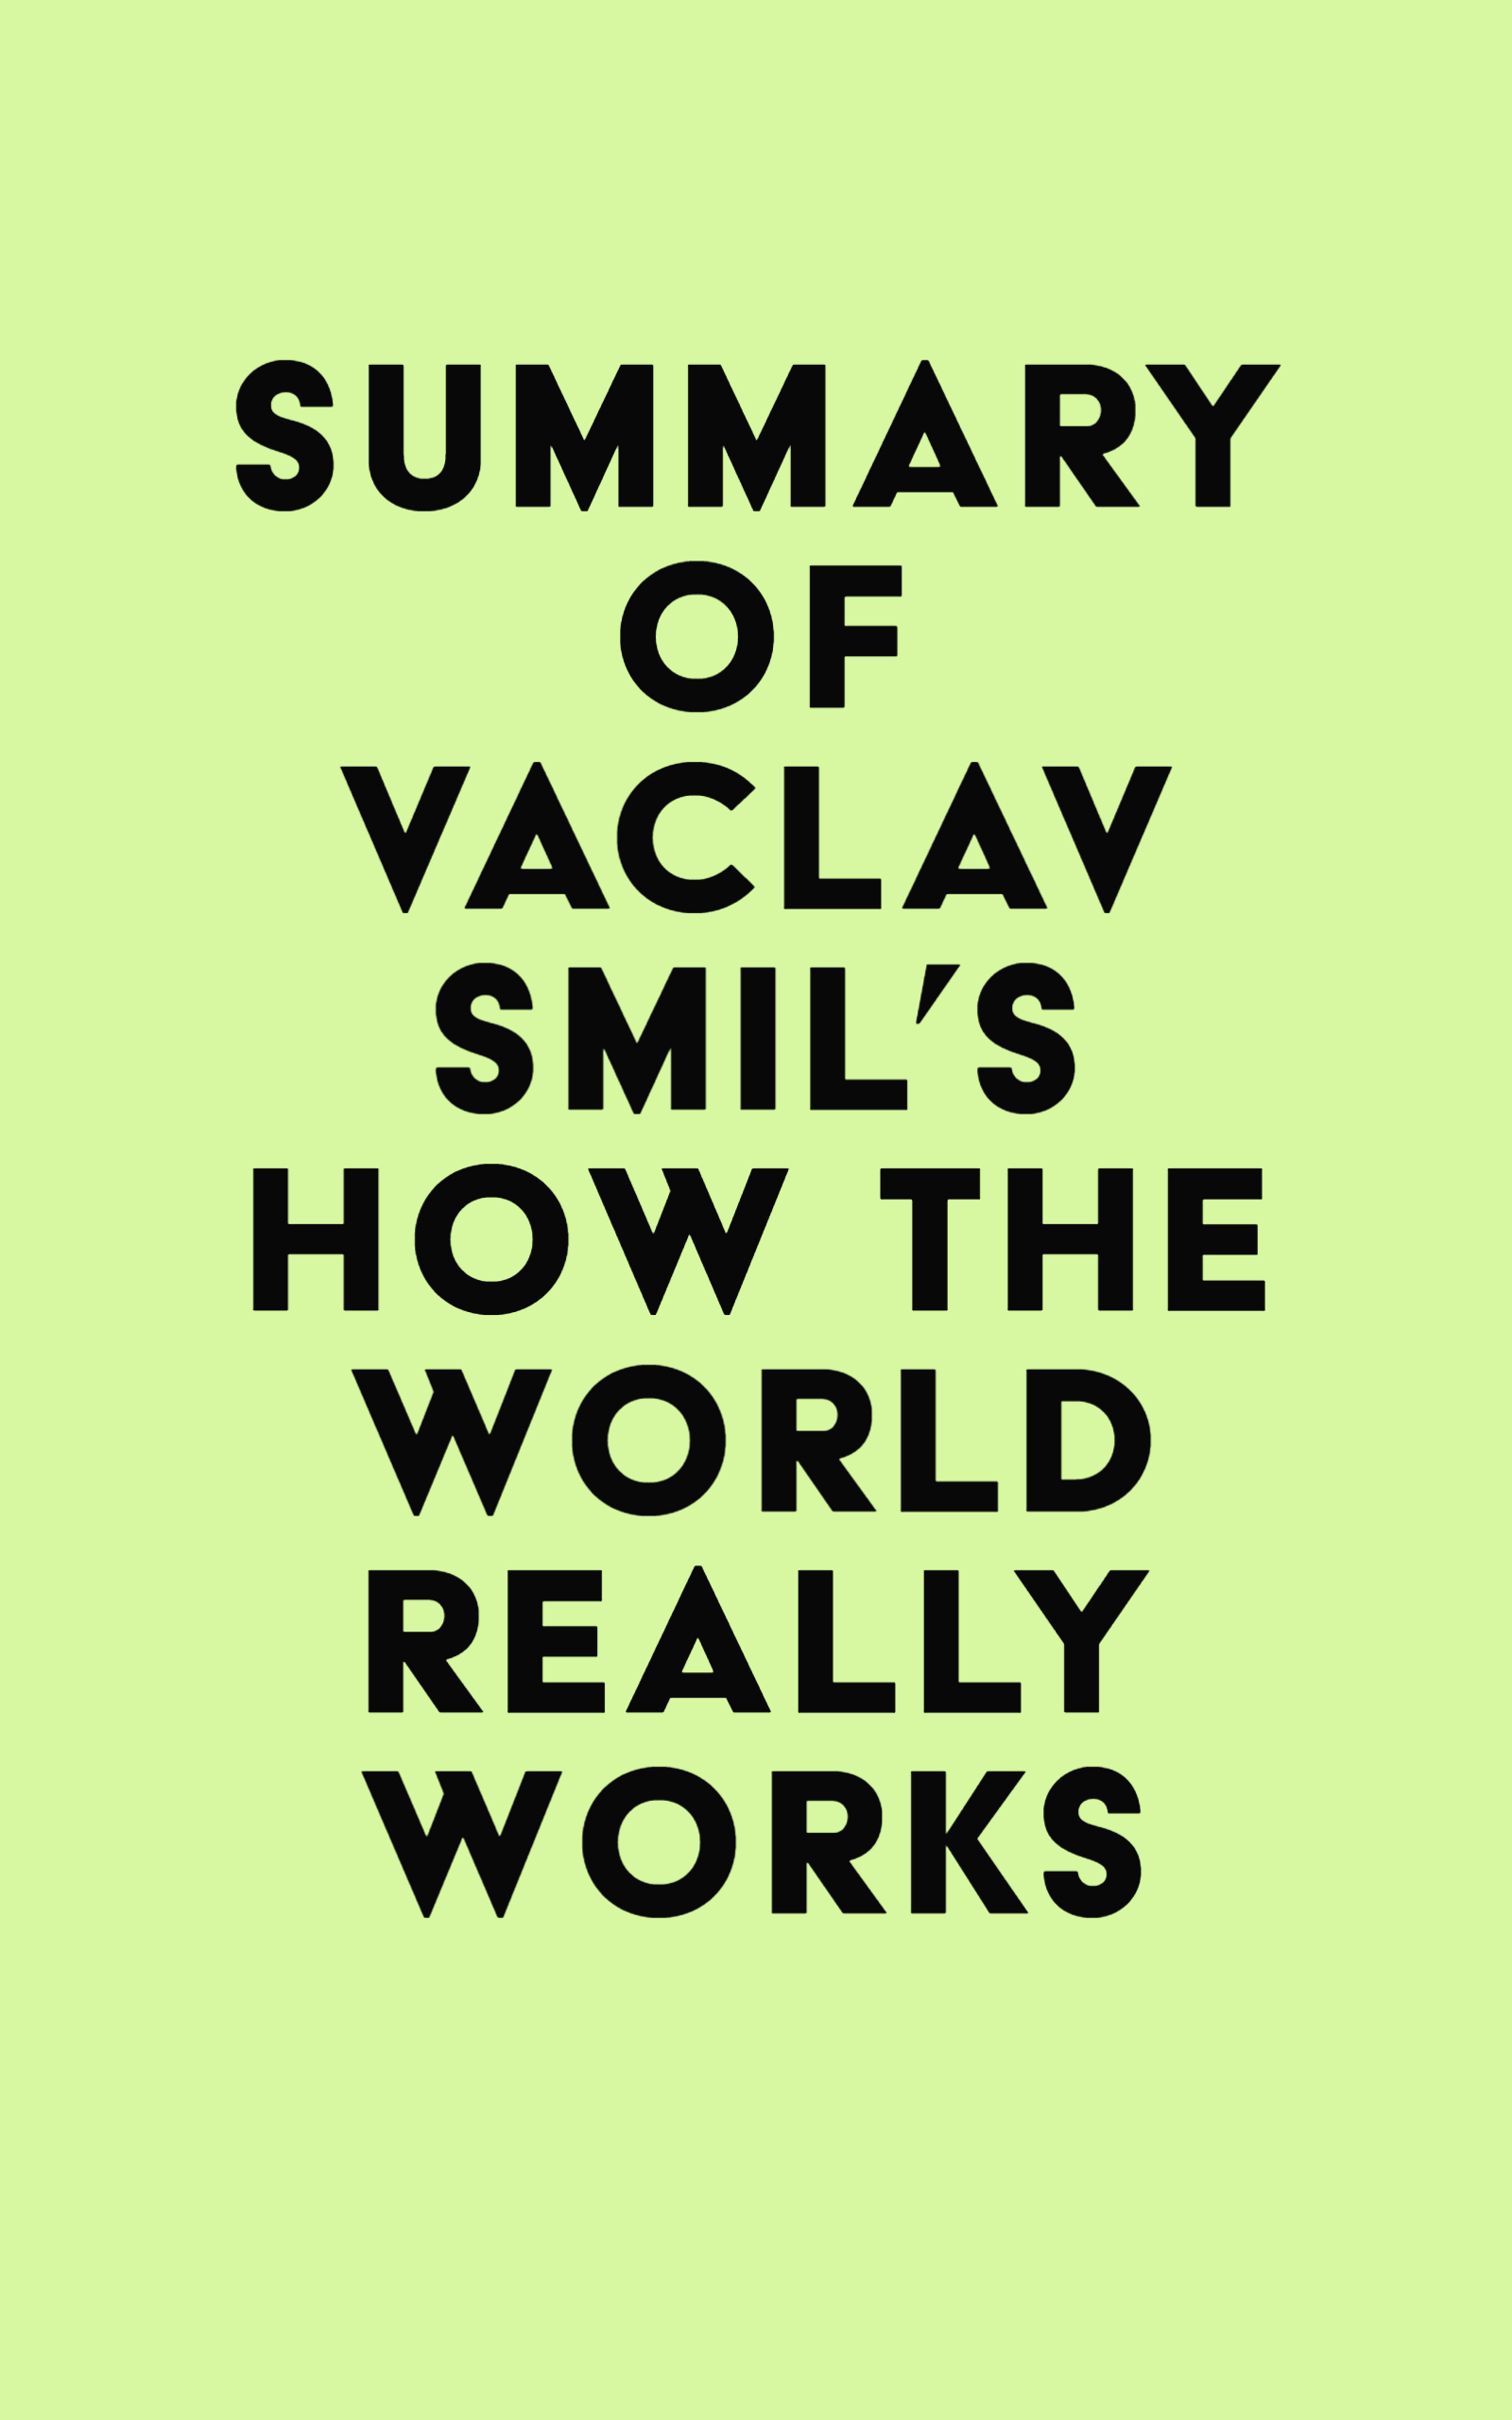 Summary of Vaclav Smil's How the World Really Works